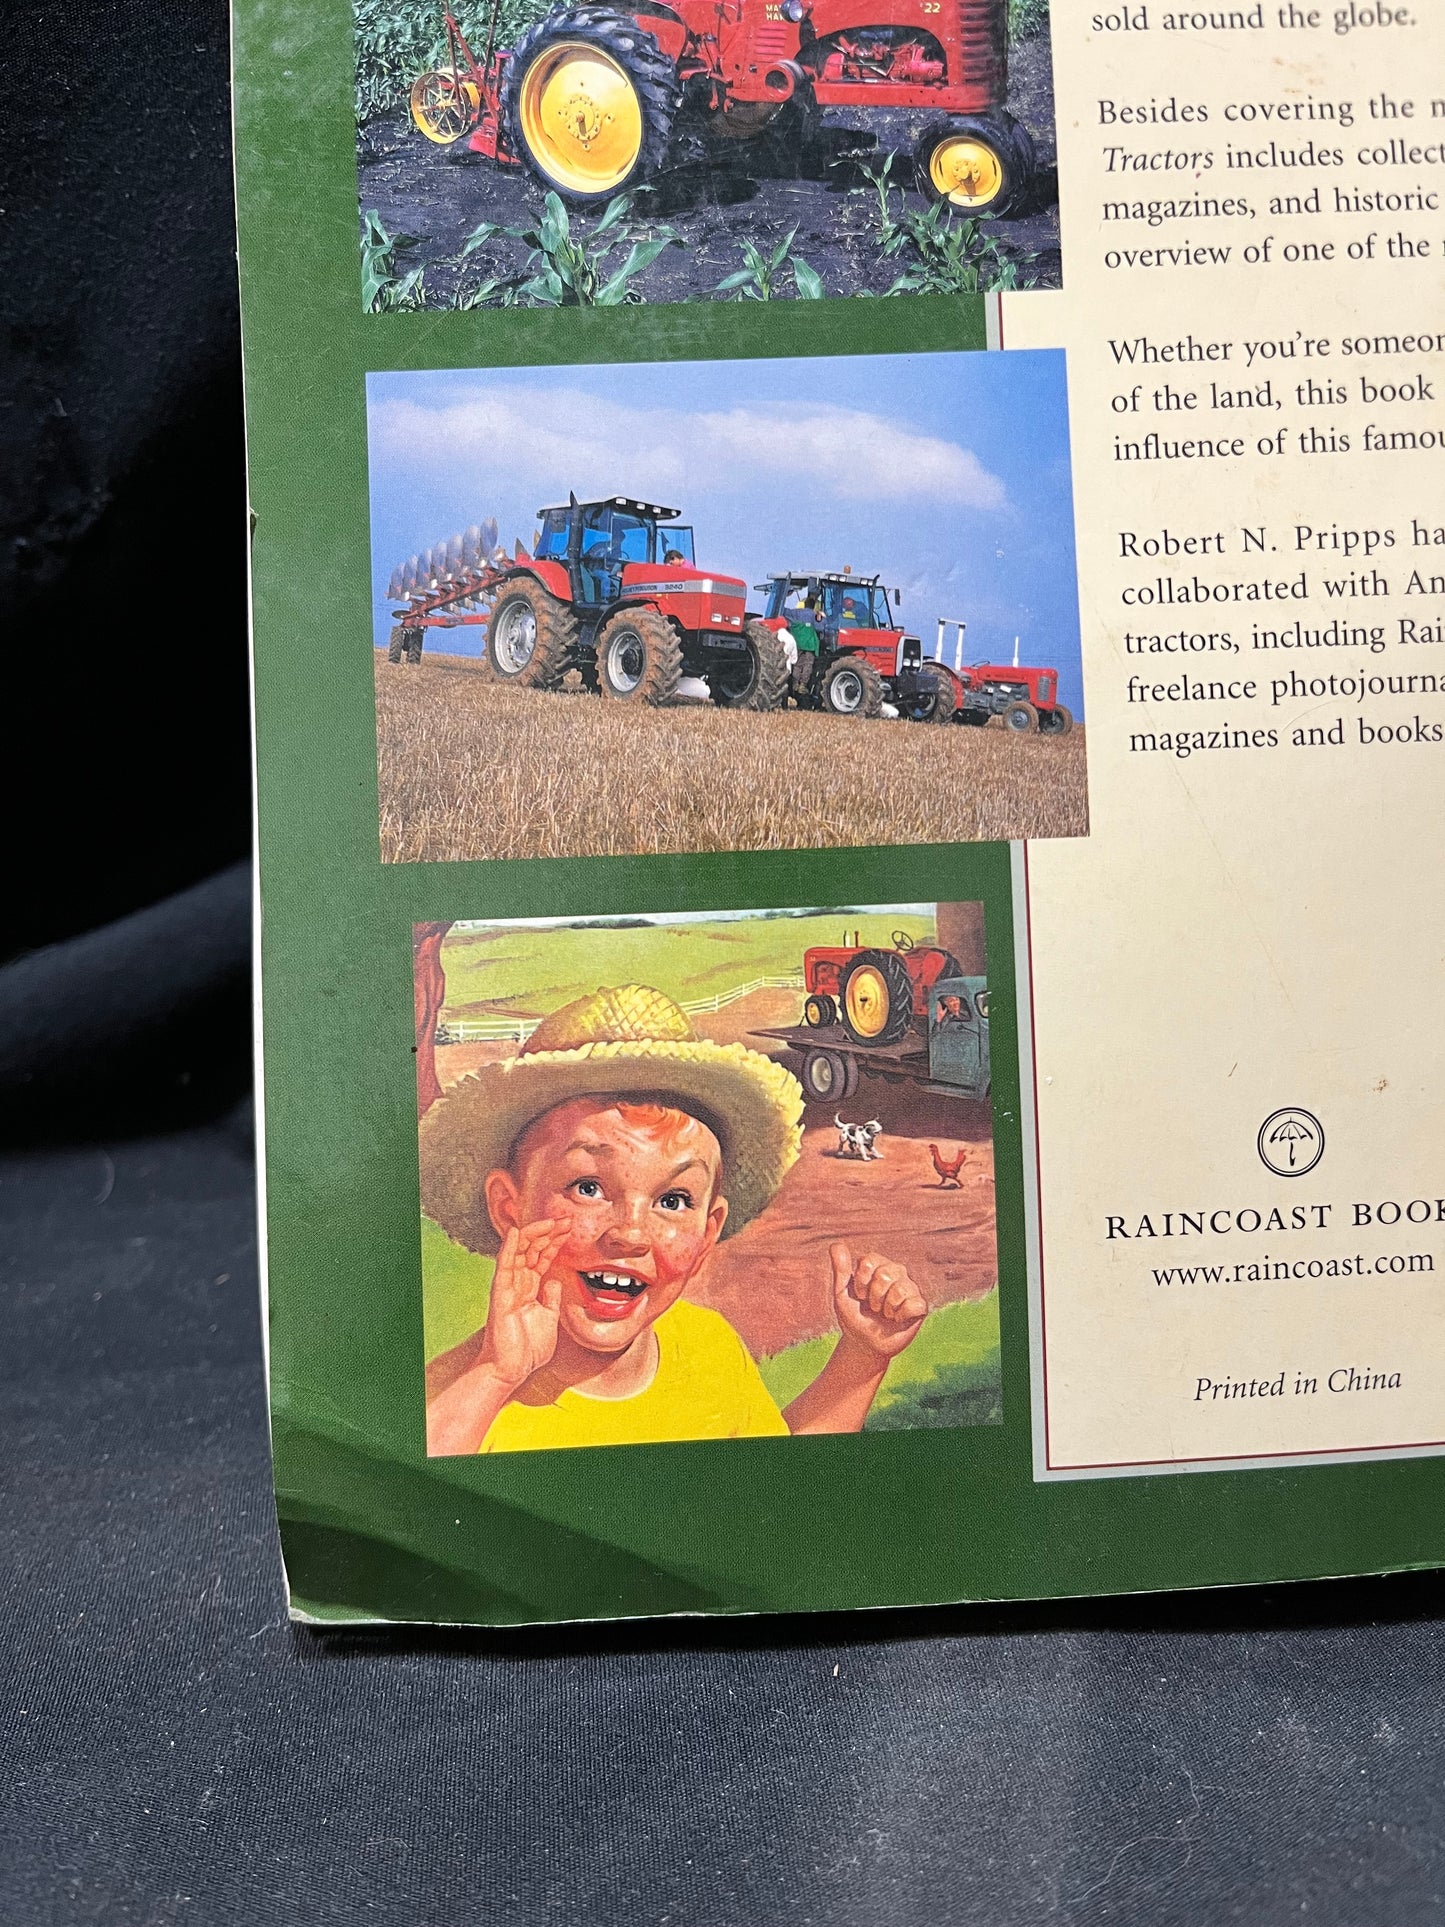 The Big Book of Massey Tractors - Complete History